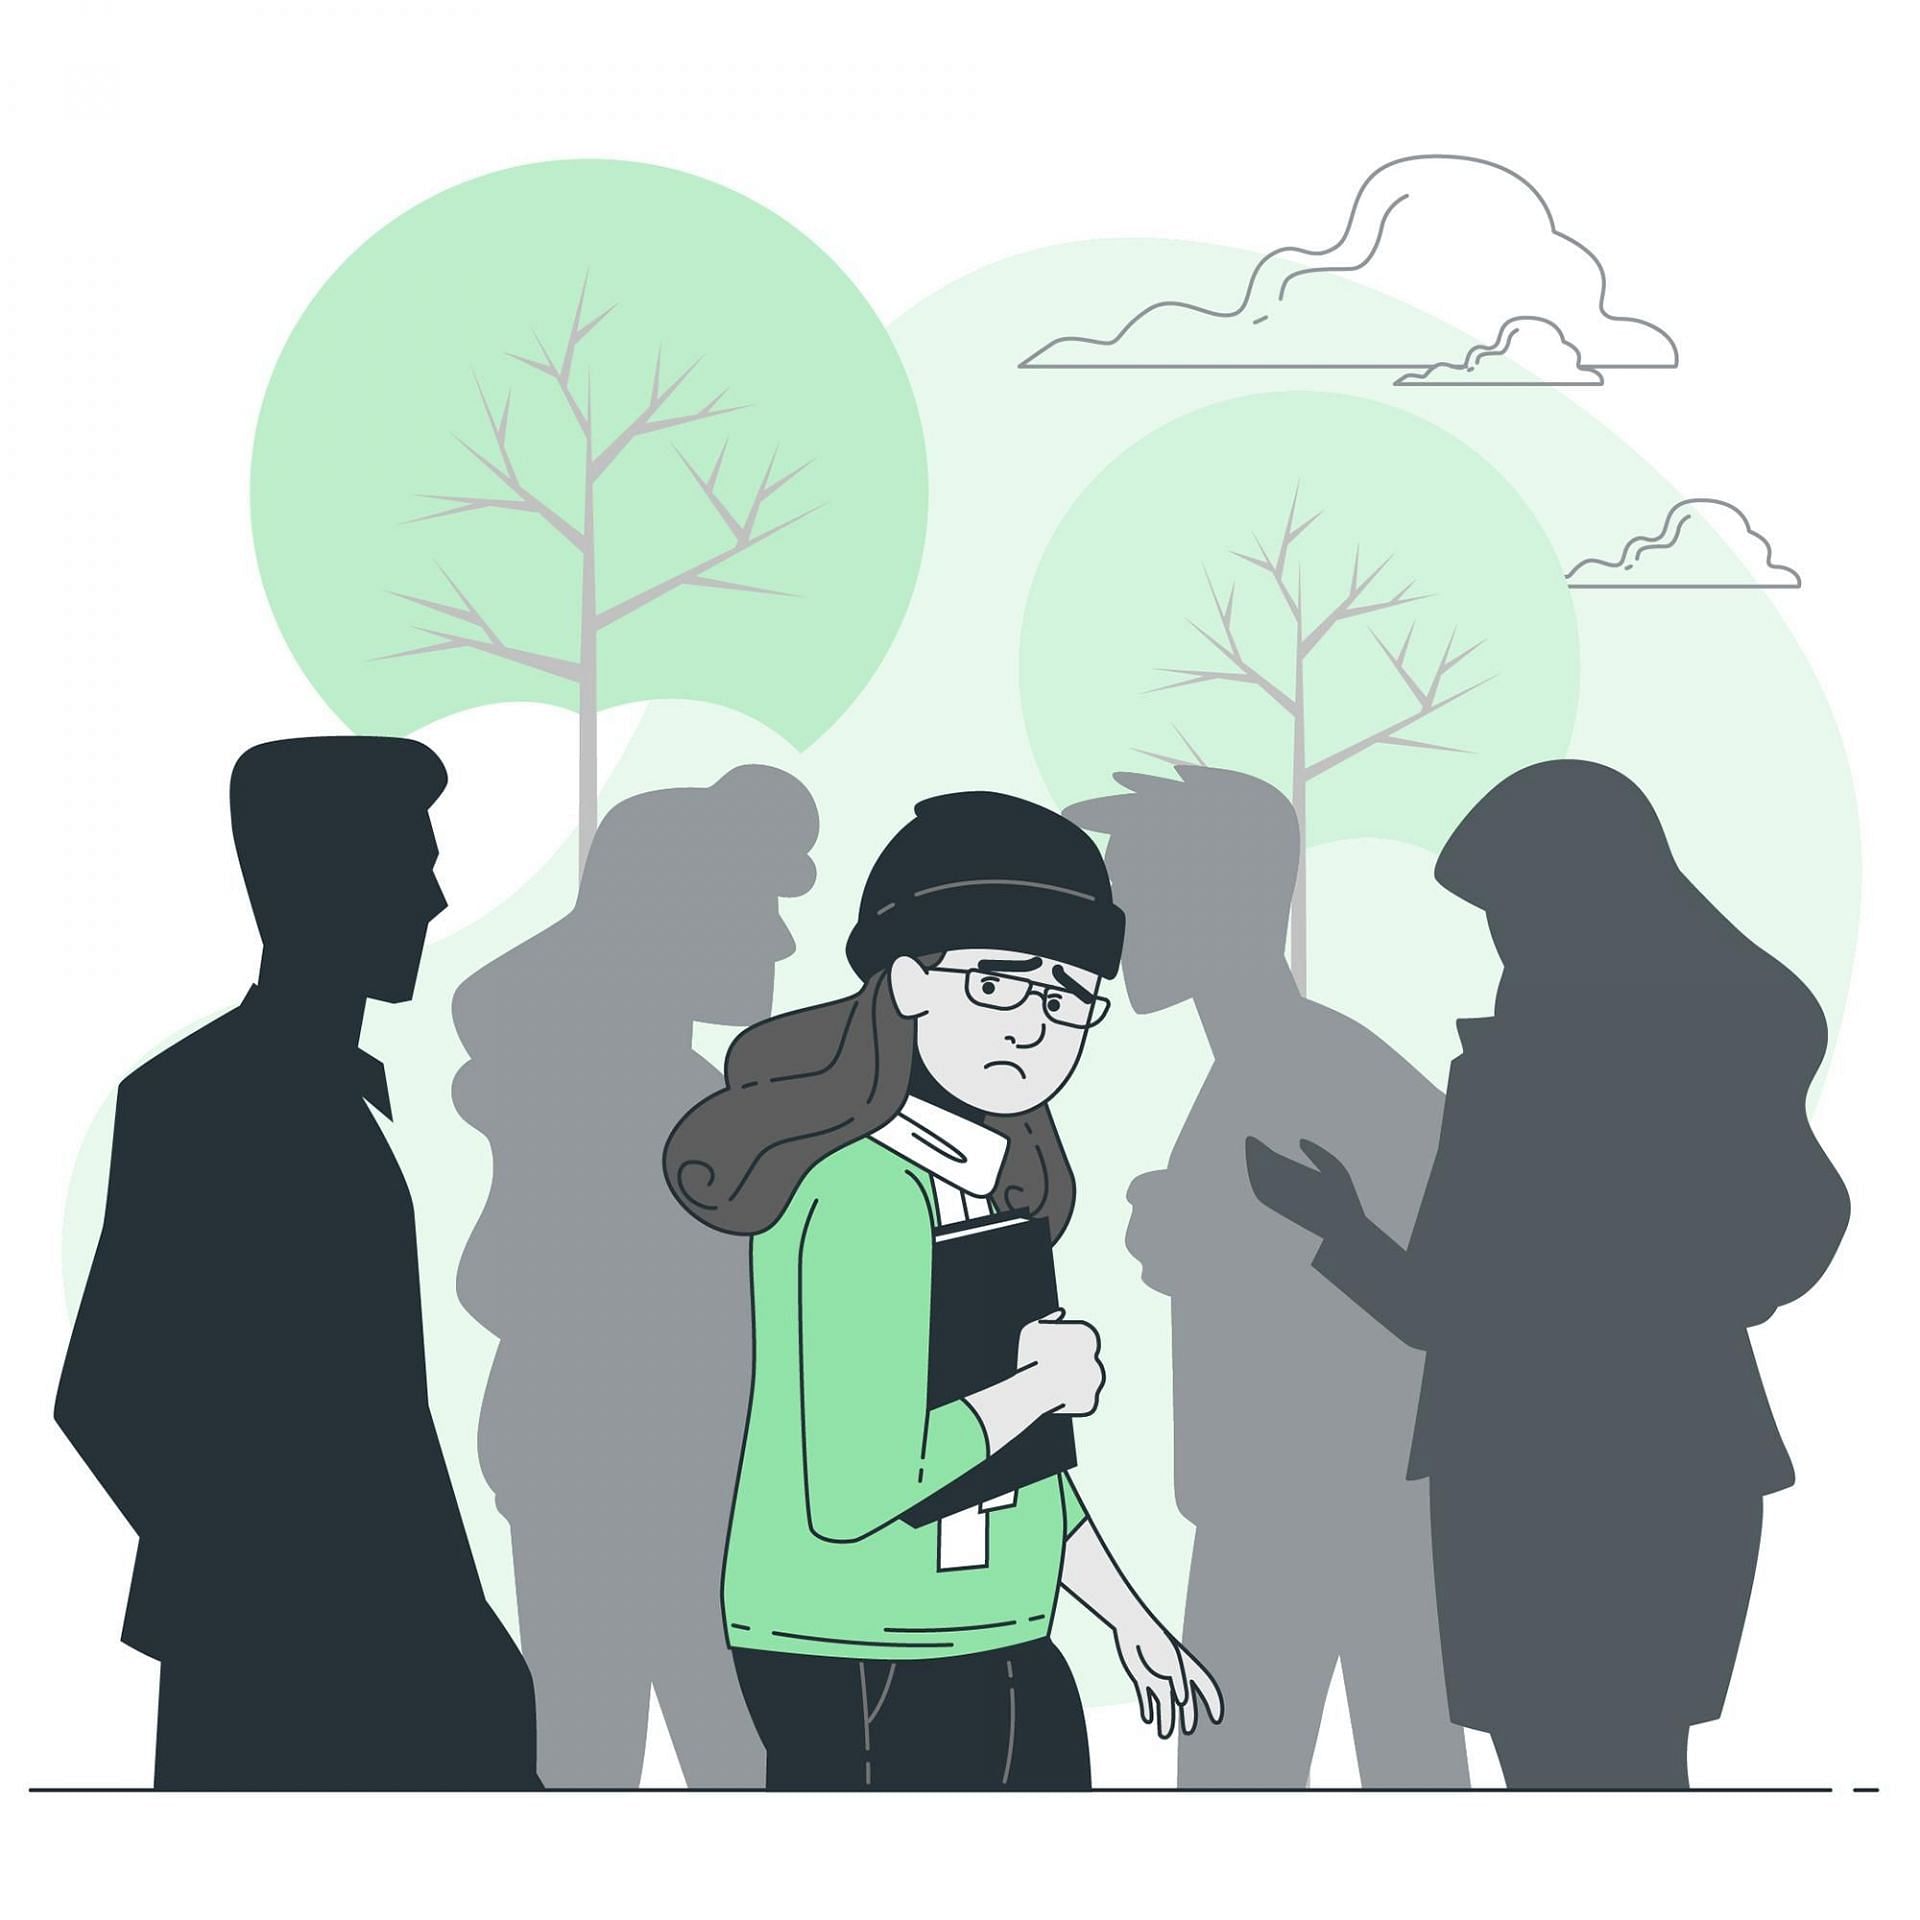 There are various causes of anxiety in social situations. (Image via Freepik/Freepik)